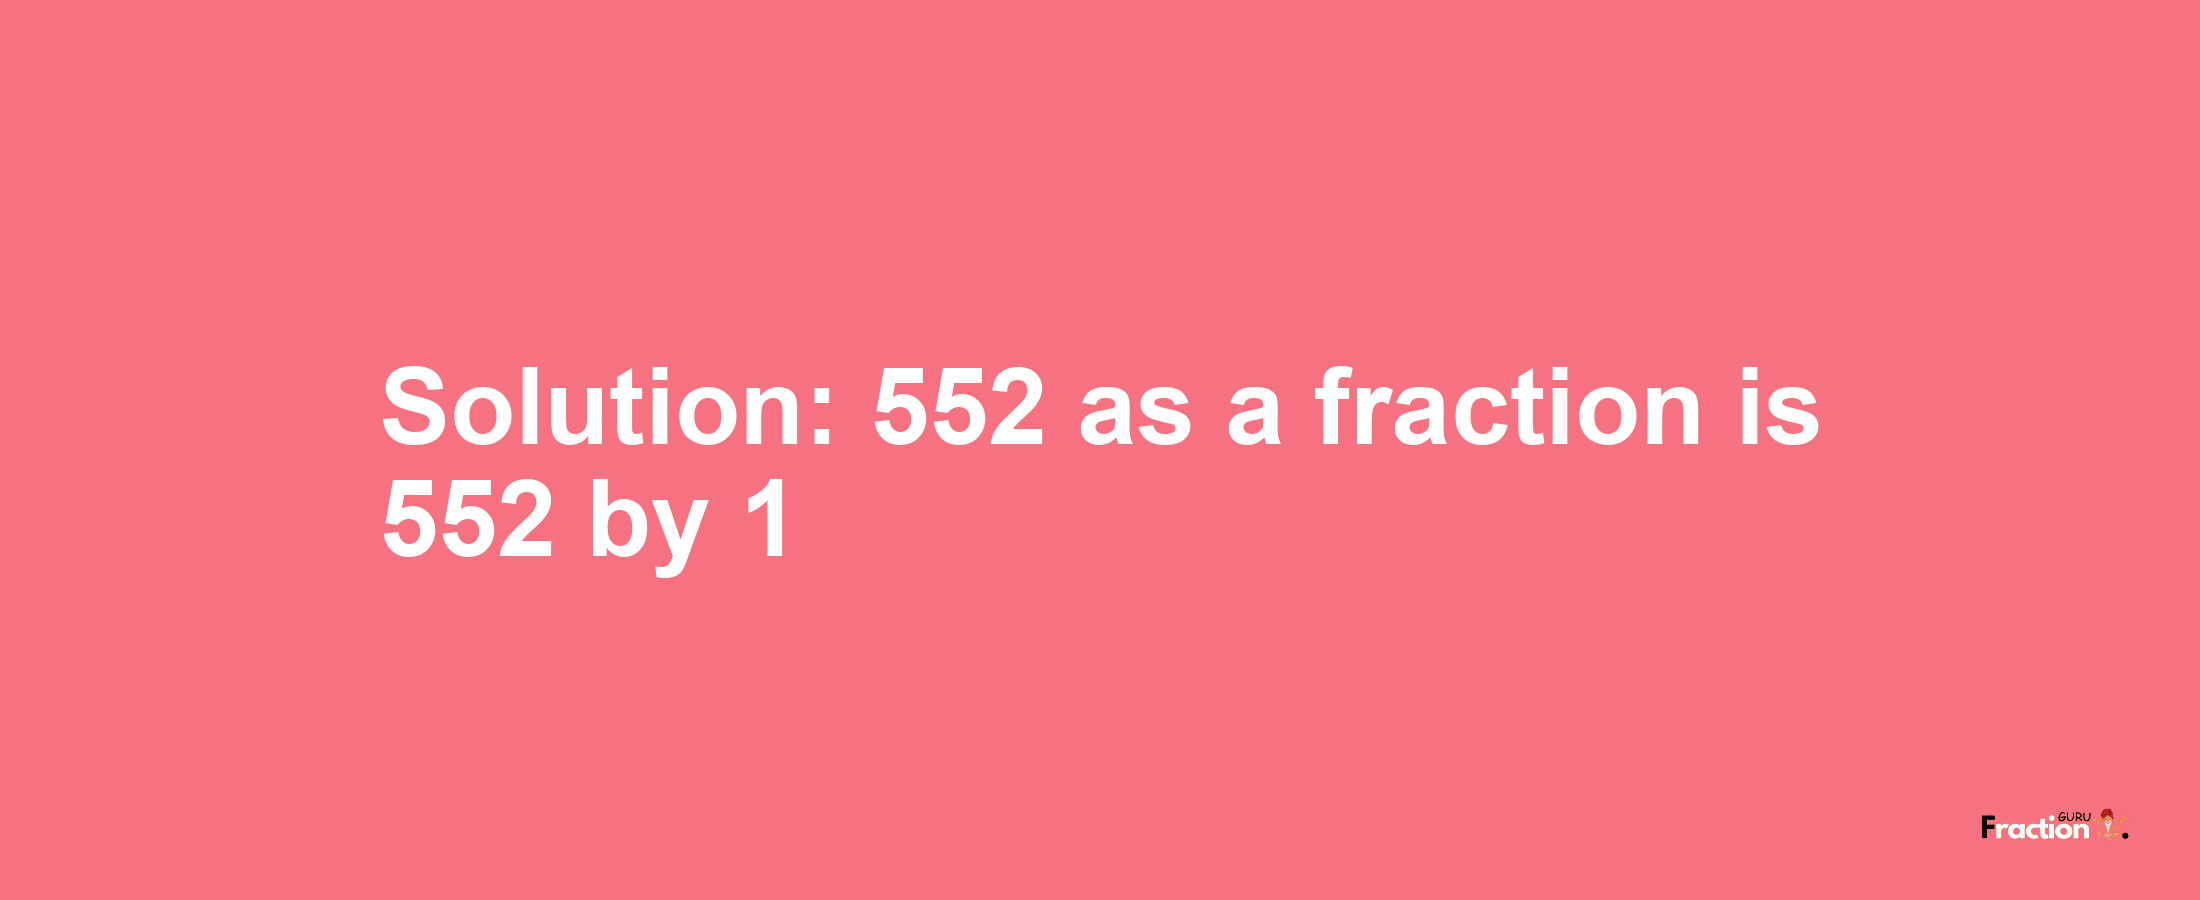 Solution:552 as a fraction is 552/1